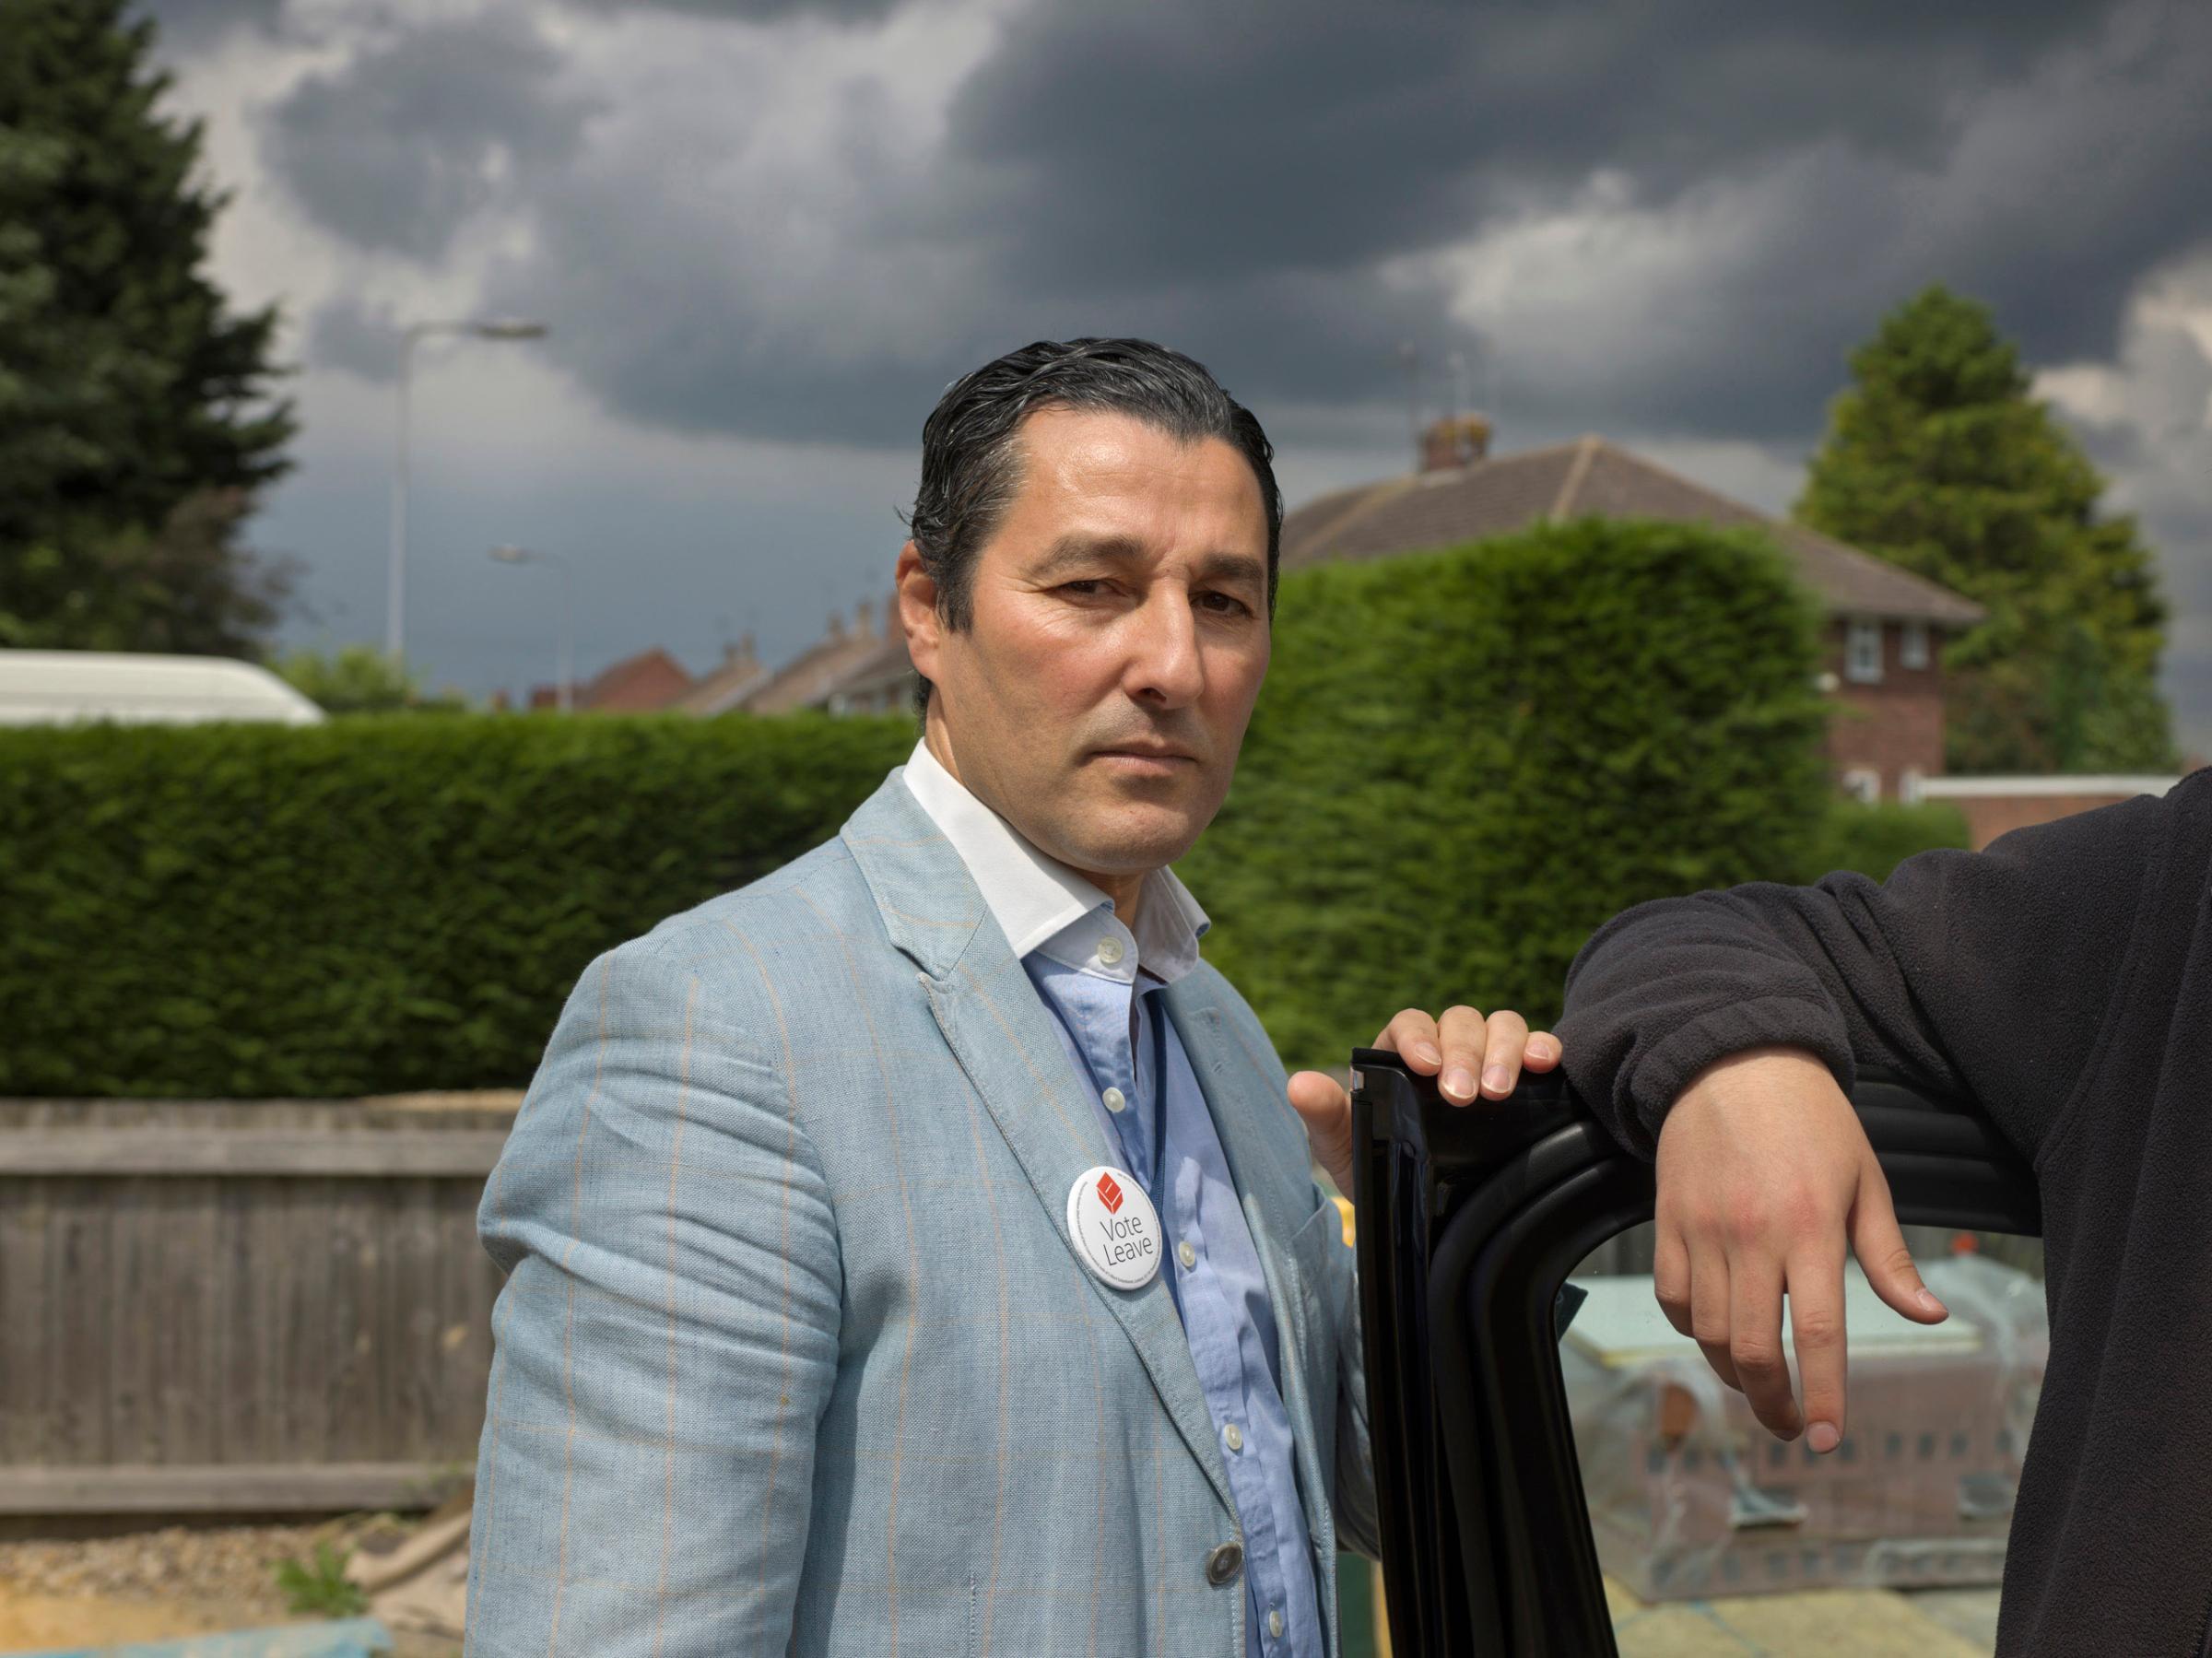 "I supported Leave for a long time" said Borough Councilman Anton Dani, age 50, born in Morocco but has lived in England for more than 20 years. "We want to control our borders and make our own rules." Boston, Lincolnshire, June 25, 2016.